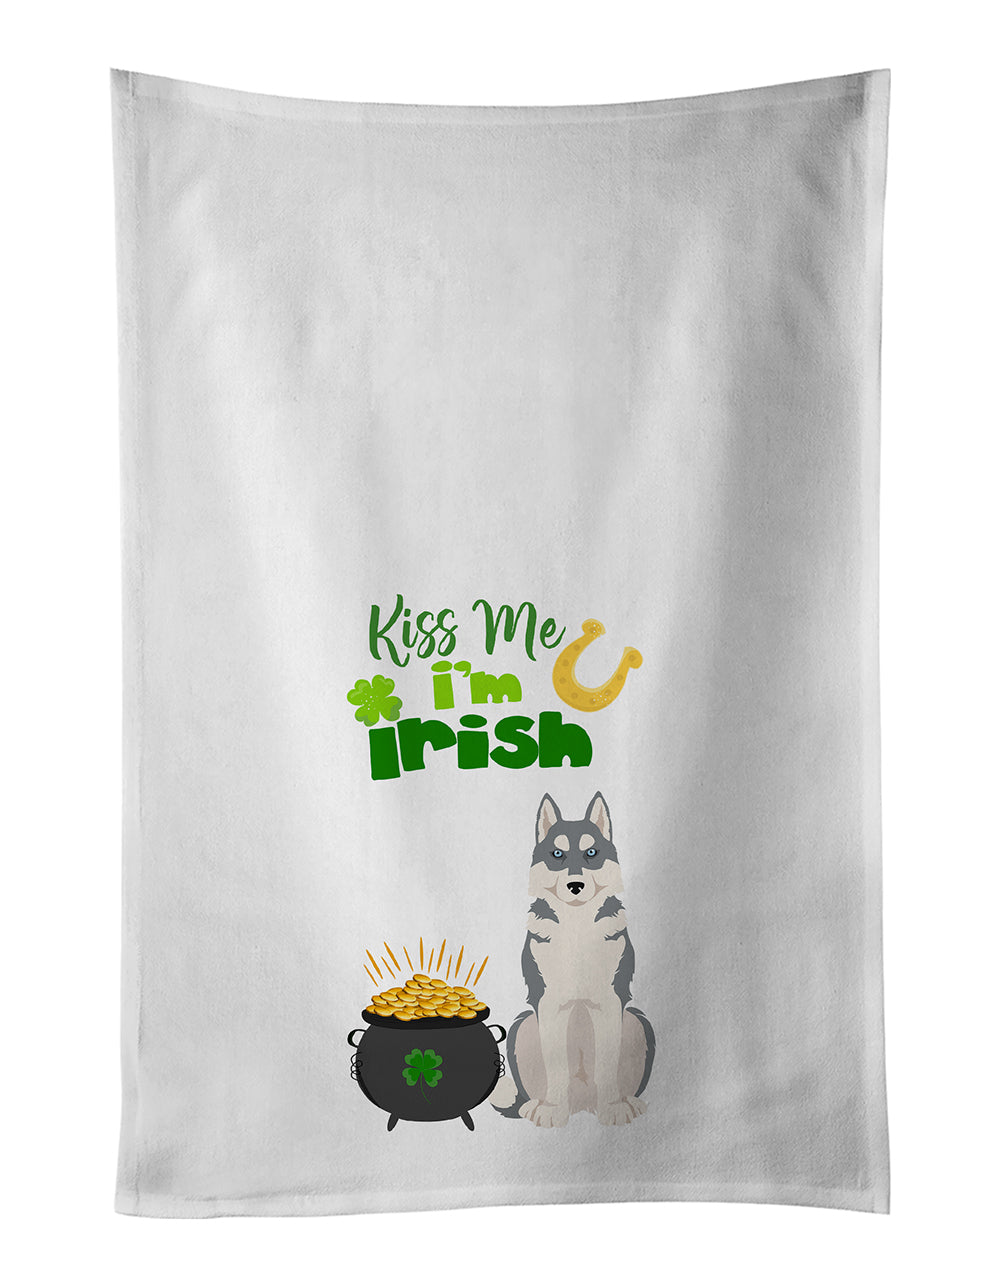 Buy this Grey Siberian Husky St. Patrick's Day White Kitchen Towel Set of 2 Dish Towels